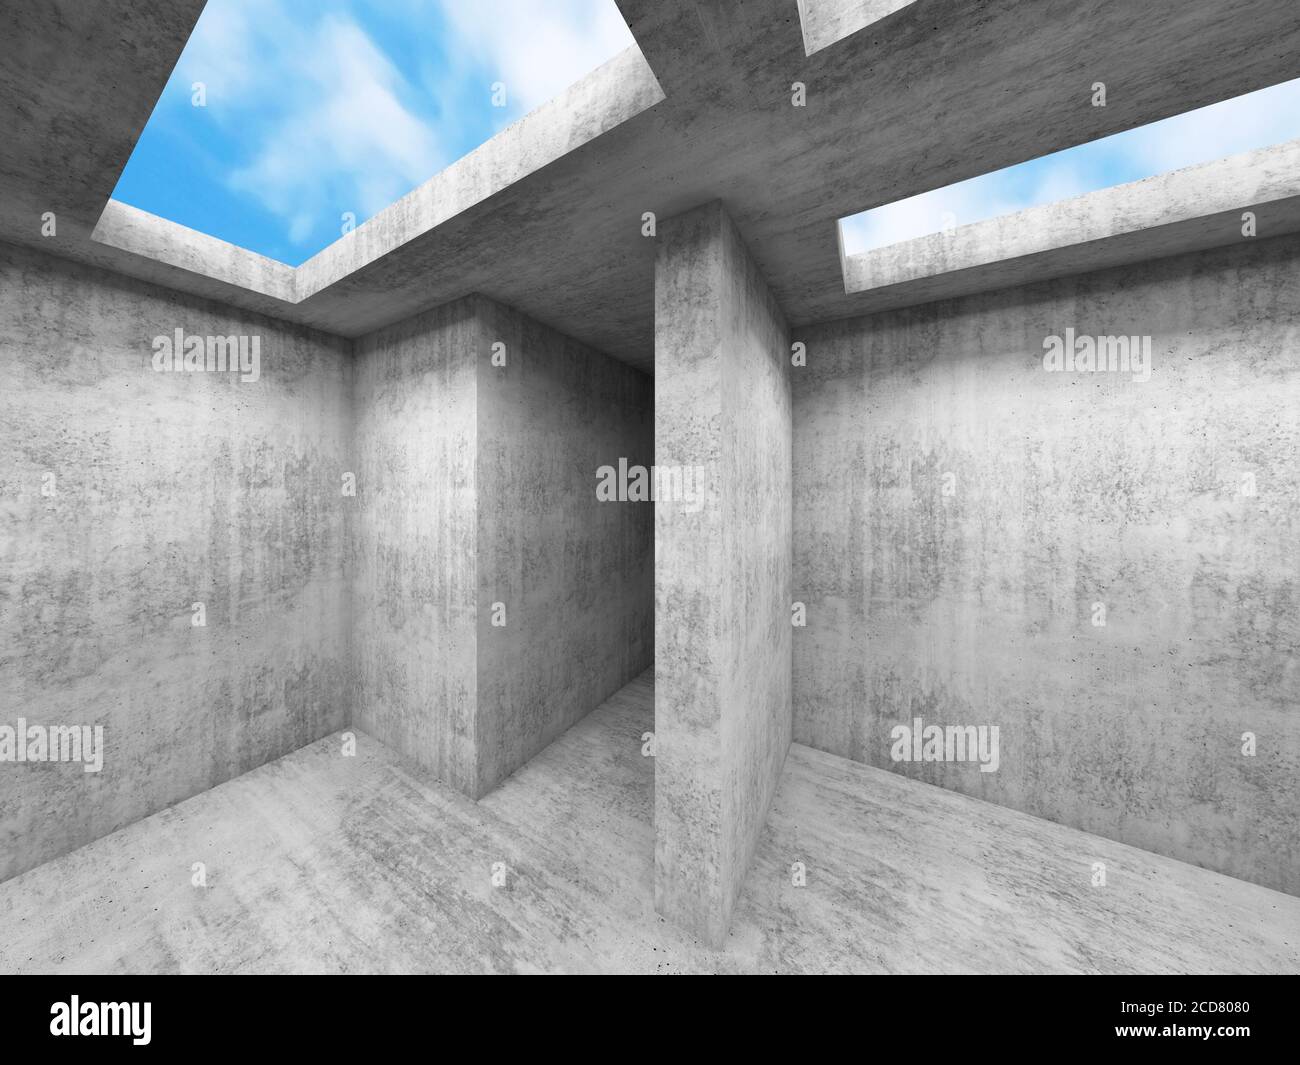 Abstract empty room interior with concrete walls and thin rectangular skylights in ceiling, 3d render illustration Stock Photo